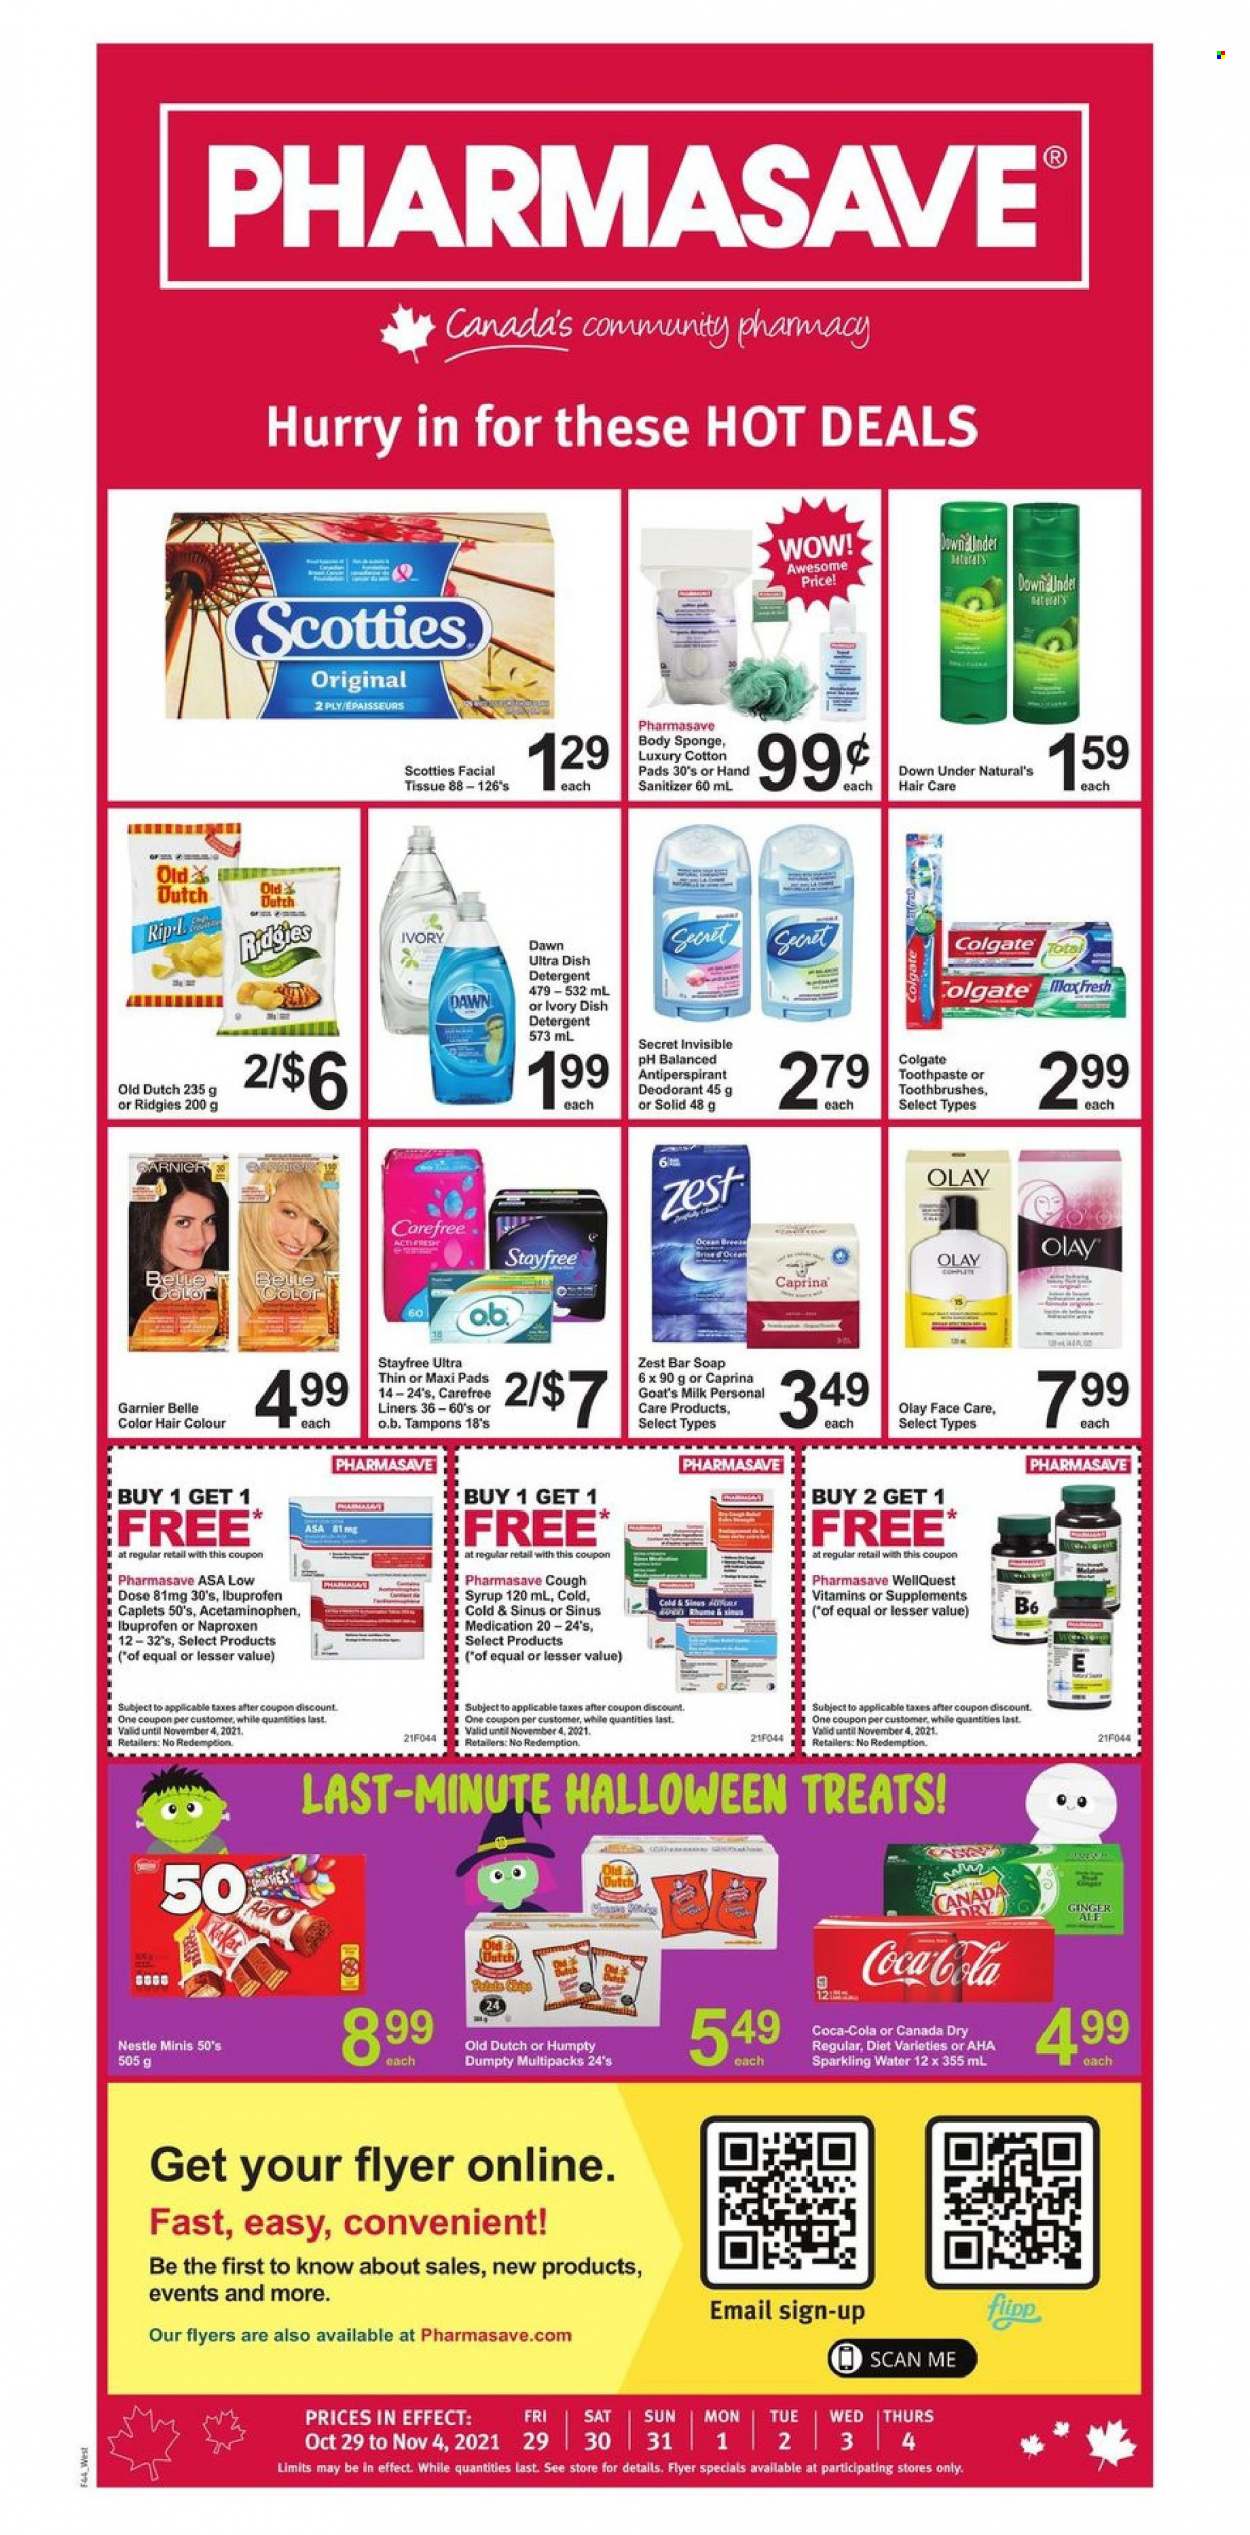 thumbnail - Pharmasave Flyer - October 29, 2021 - November 04, 2021 - Sales products - milk, syrup, Canada Dry, Coca-Cola, ginger ale, sparkling water, tissues, soap bar, soap, toothpaste, Stayfree, sanitary pads, Carefree, tampons, Olay, hair color, anti-perspirant, hand sanitizer, Halloween, Ibuprofen, Nestlé, detergent, Colgate, Garnier, deodorant. Page 1.